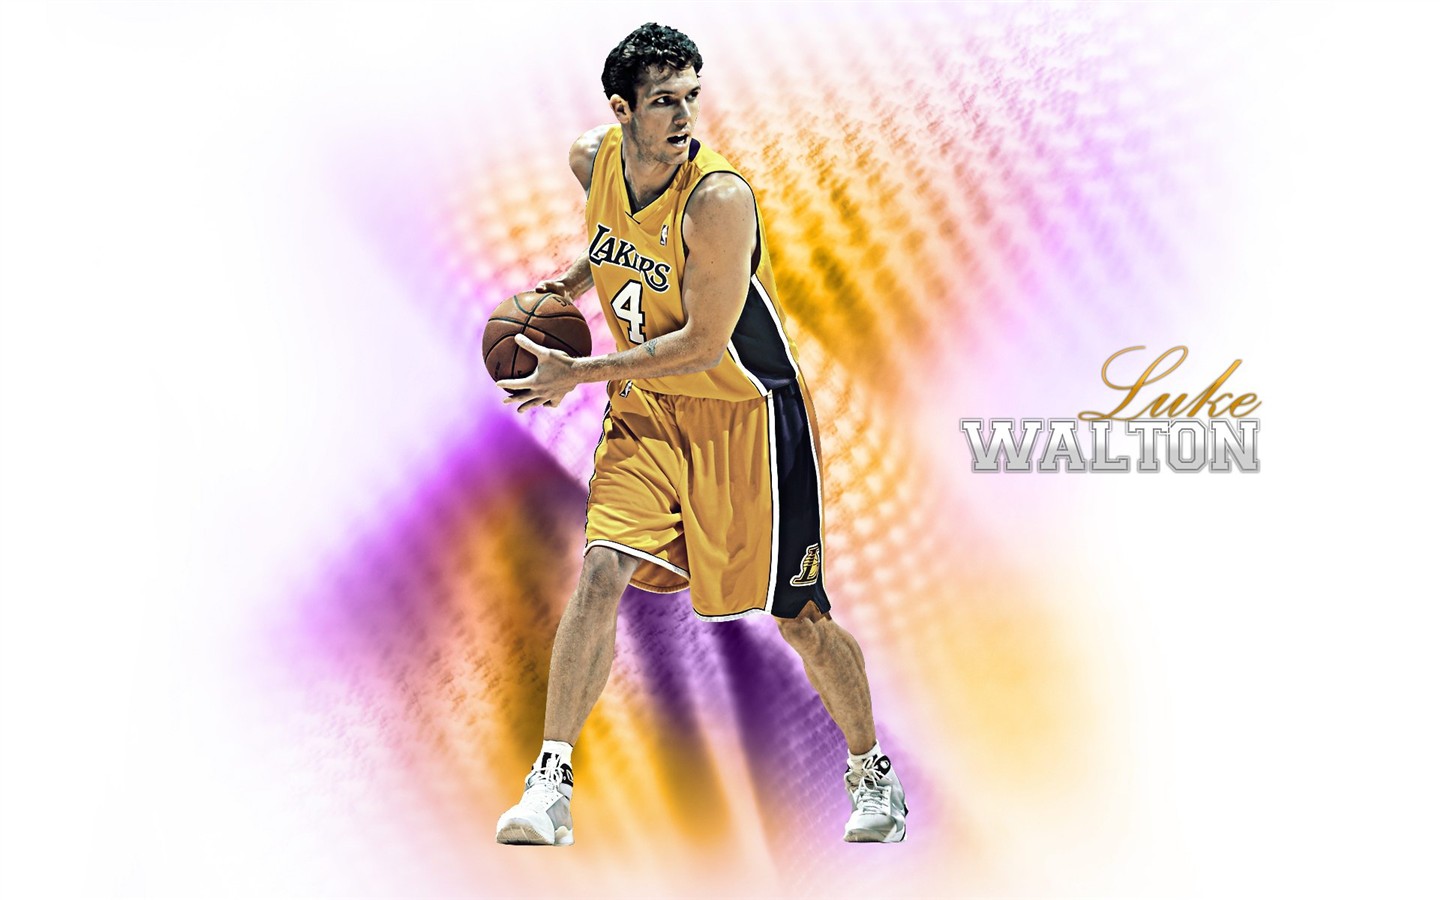 Los Angeles Lakers Wallpaper Oficial #19 - 1440x900